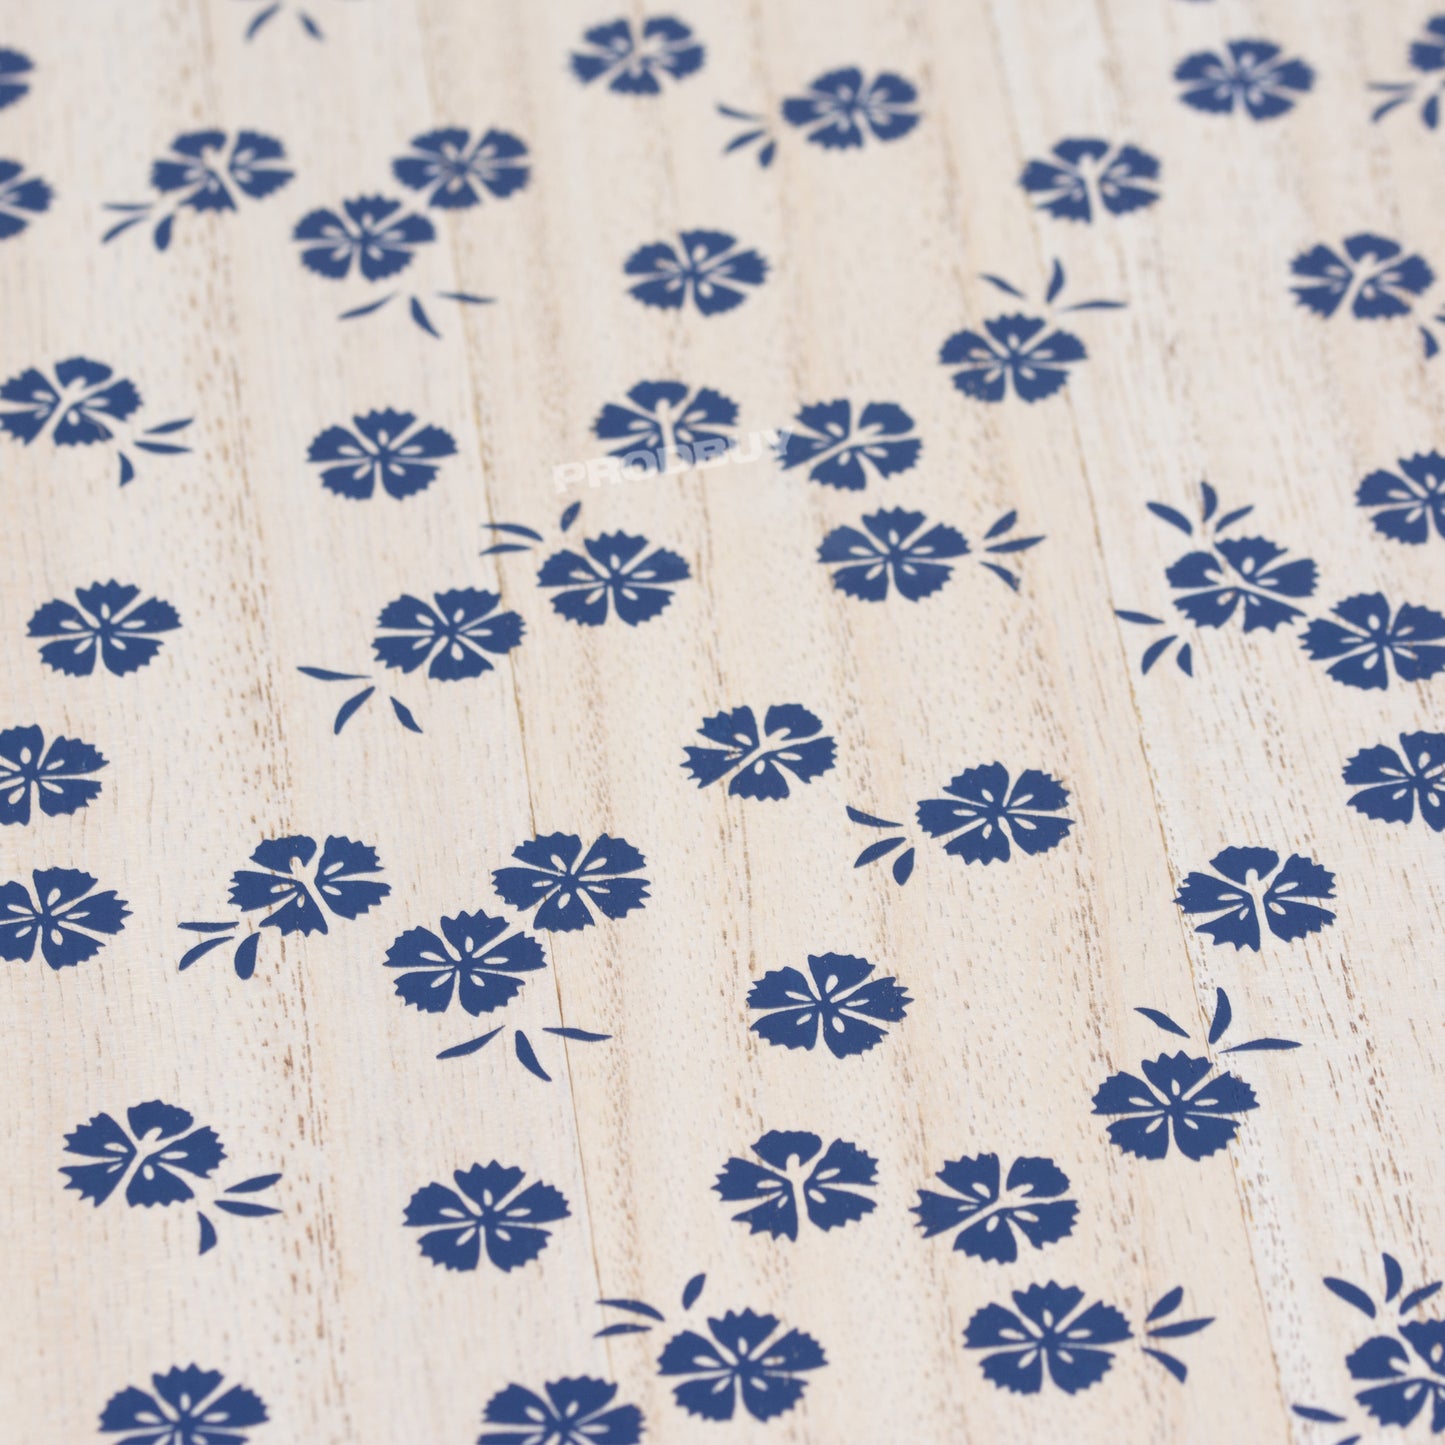 Pack of 4 Wooden Placemats with Blue Flowers Print